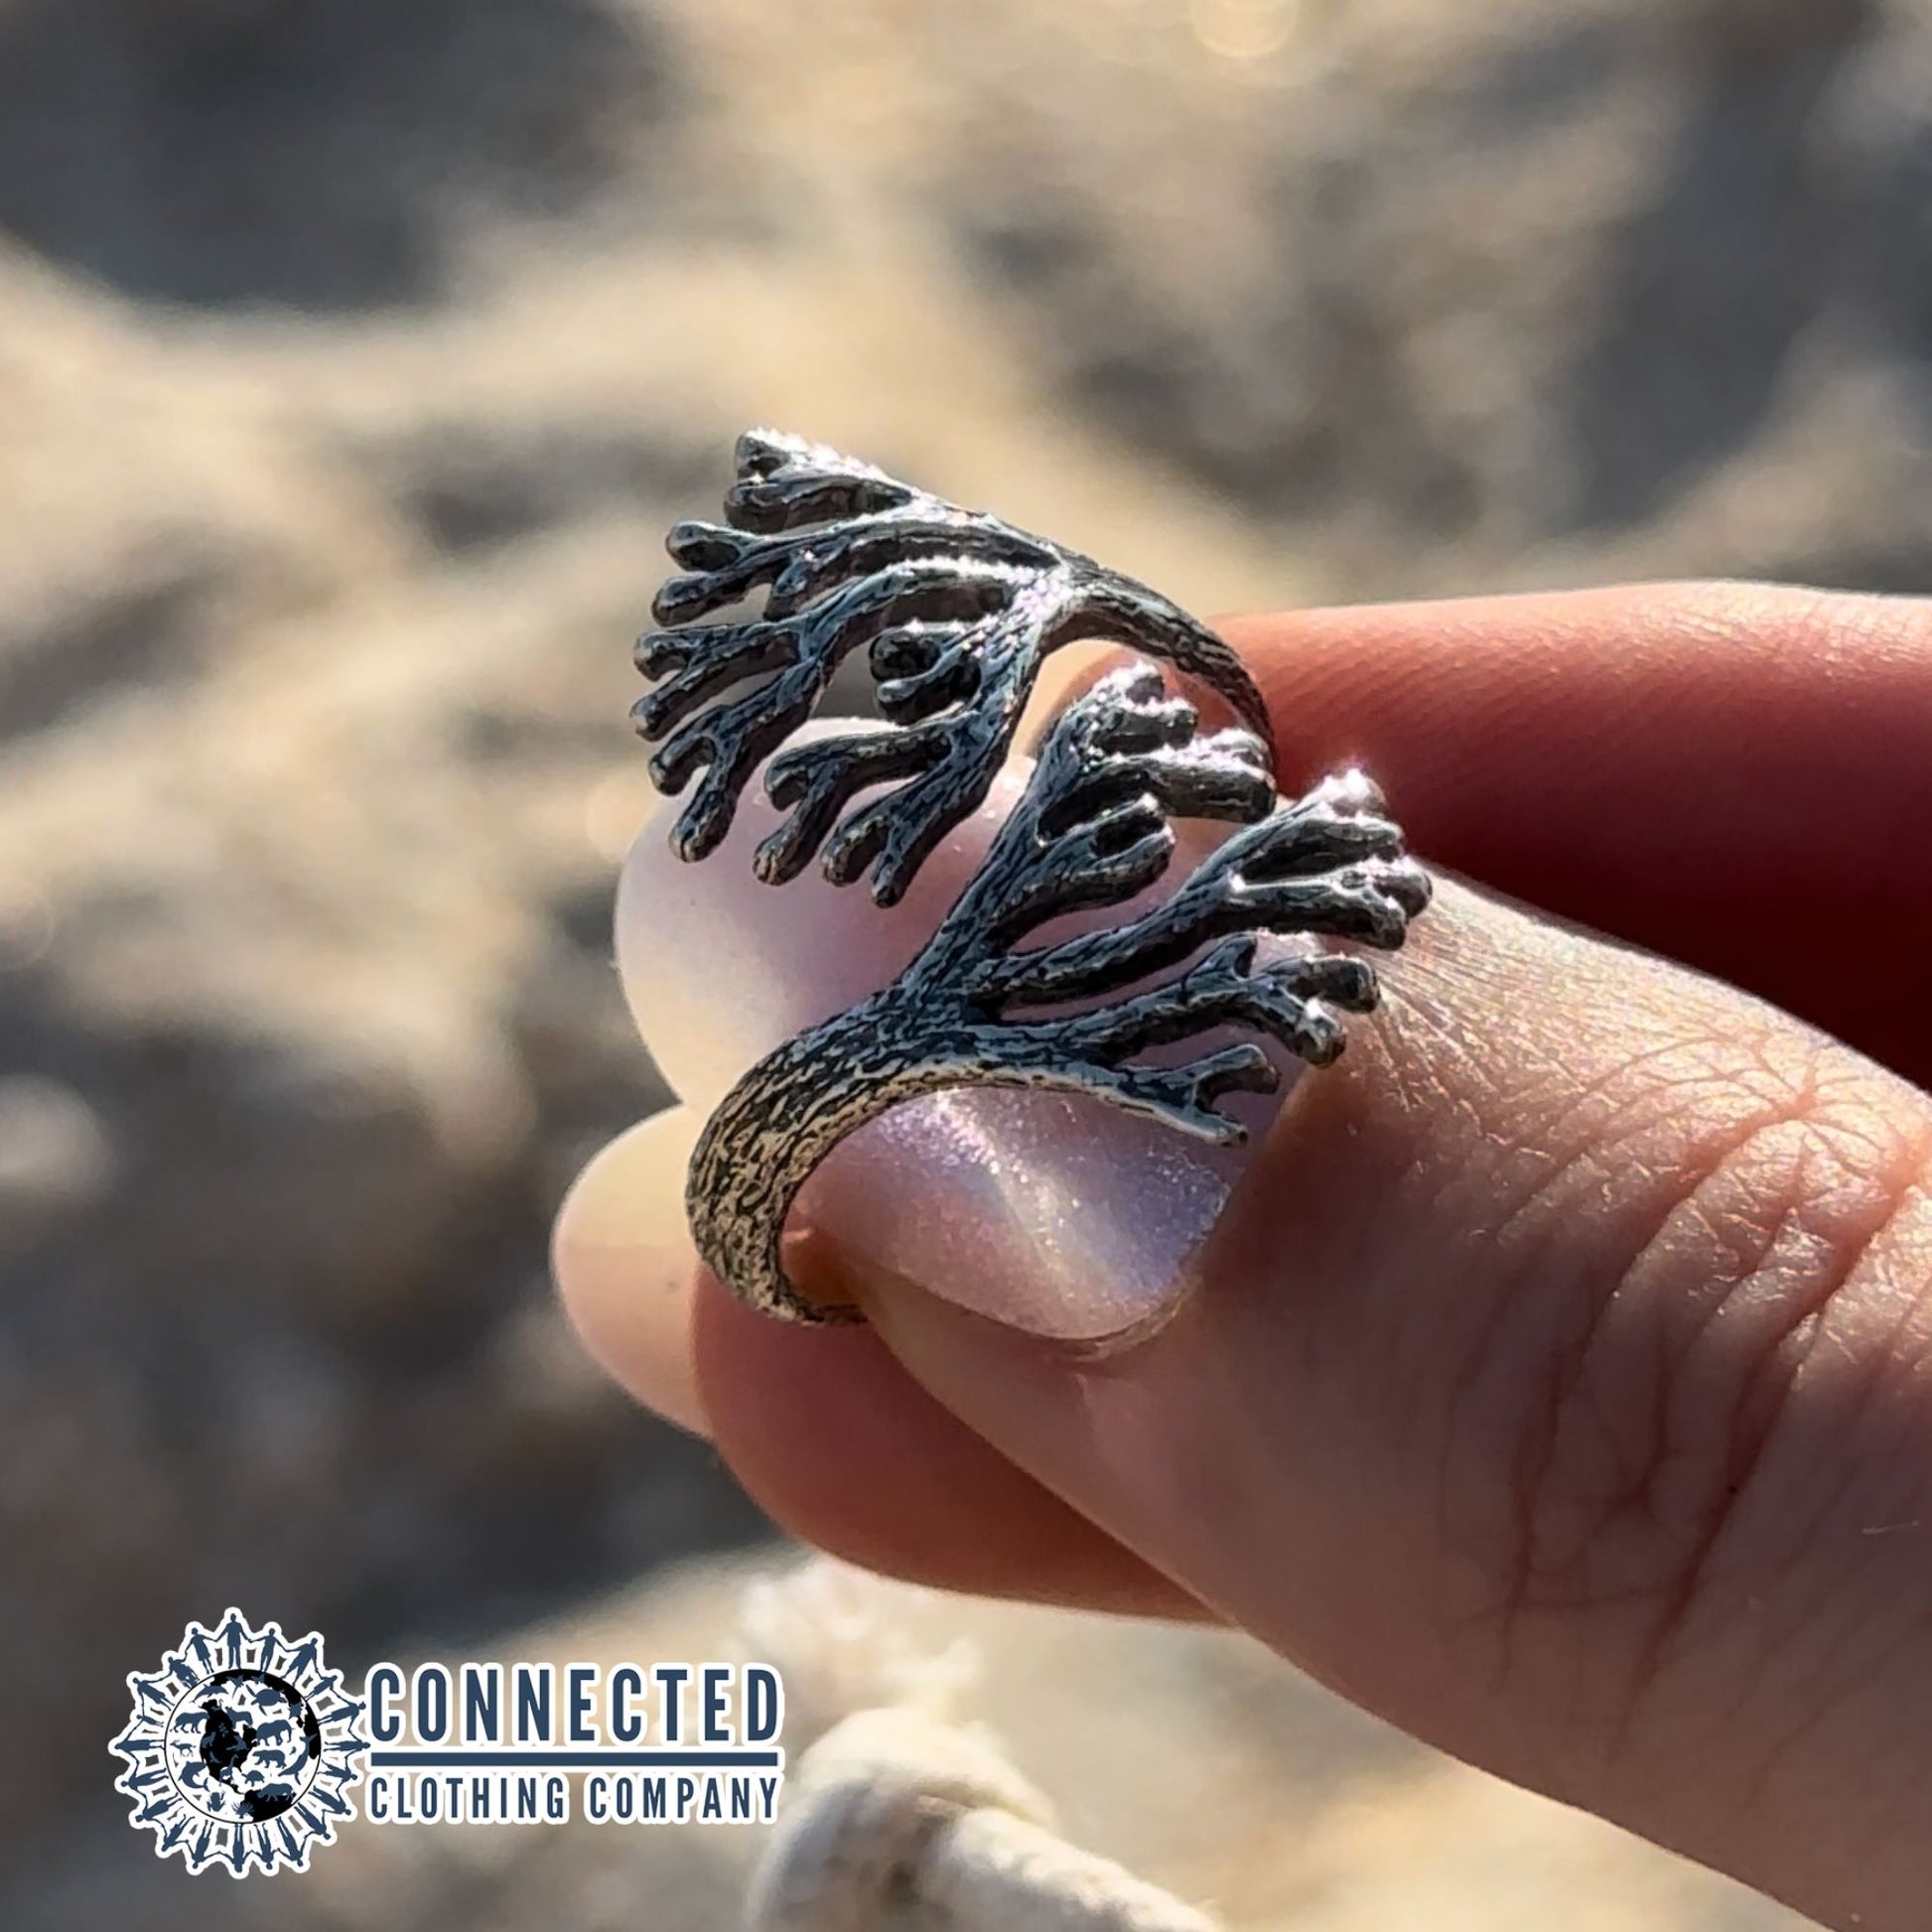 Sea Coral Adjustable Ring - Connected Clothing Company - 10% donated to ocean conservation